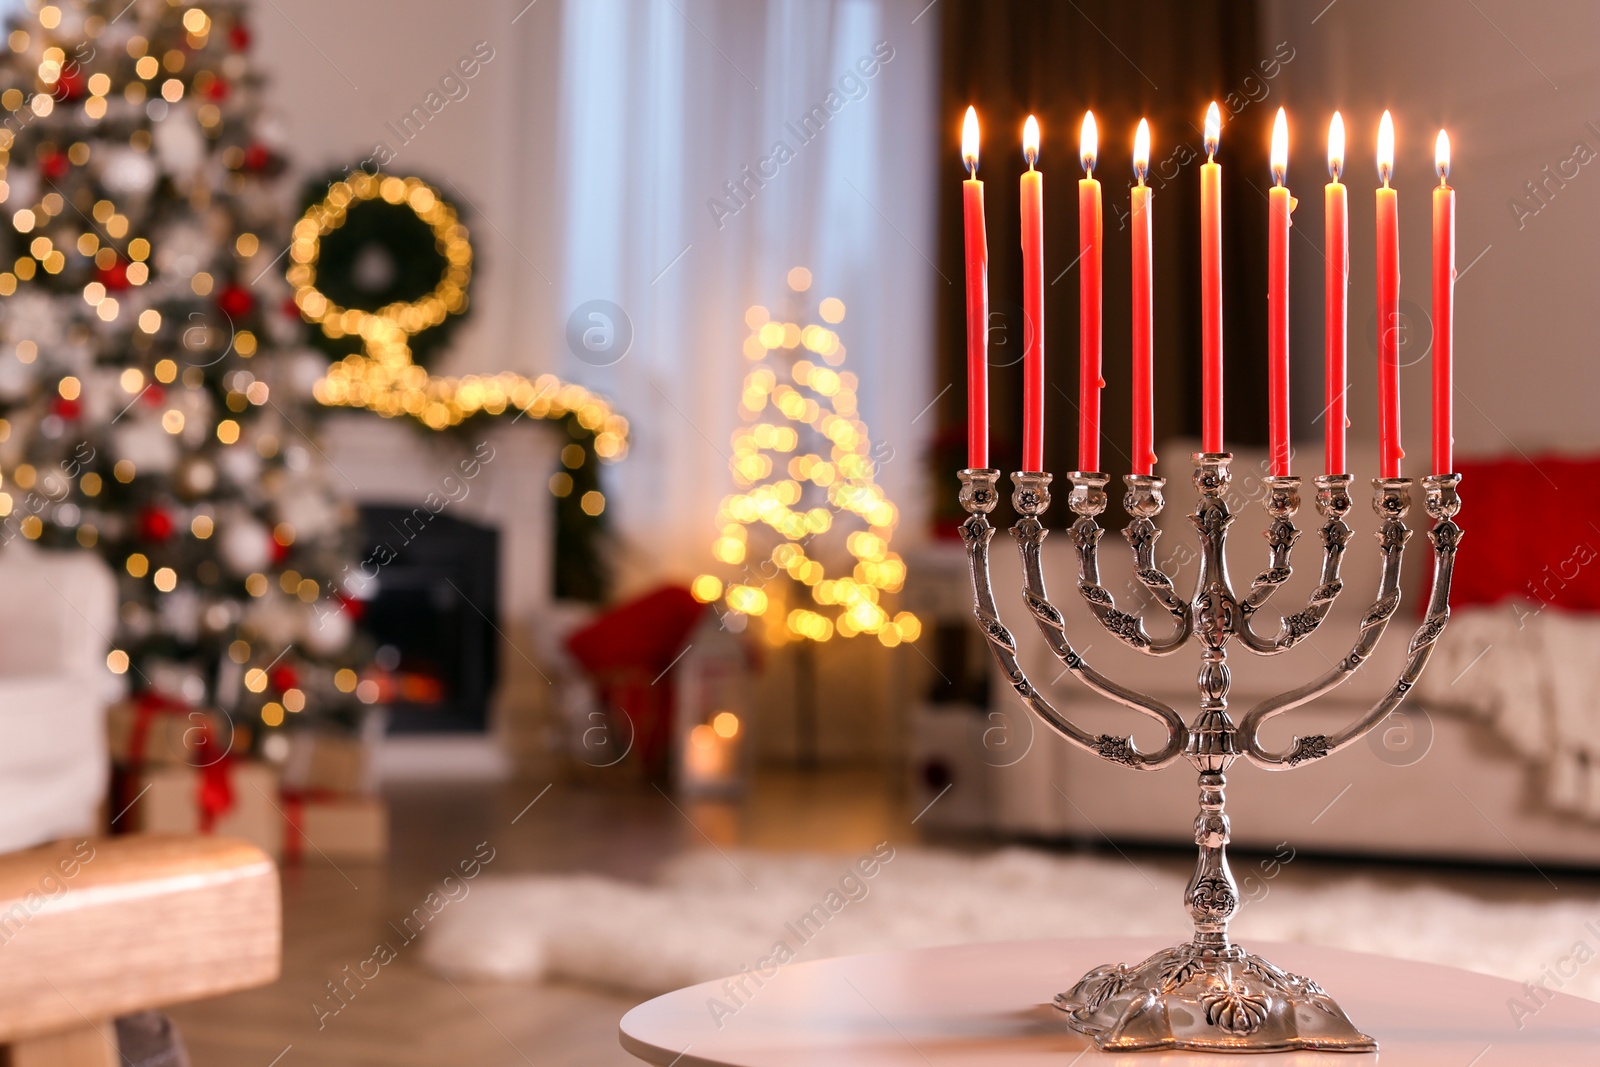 Photo of Silver menorah on white table in room with fireplace and Christmas decorations. Hanukkah symbol